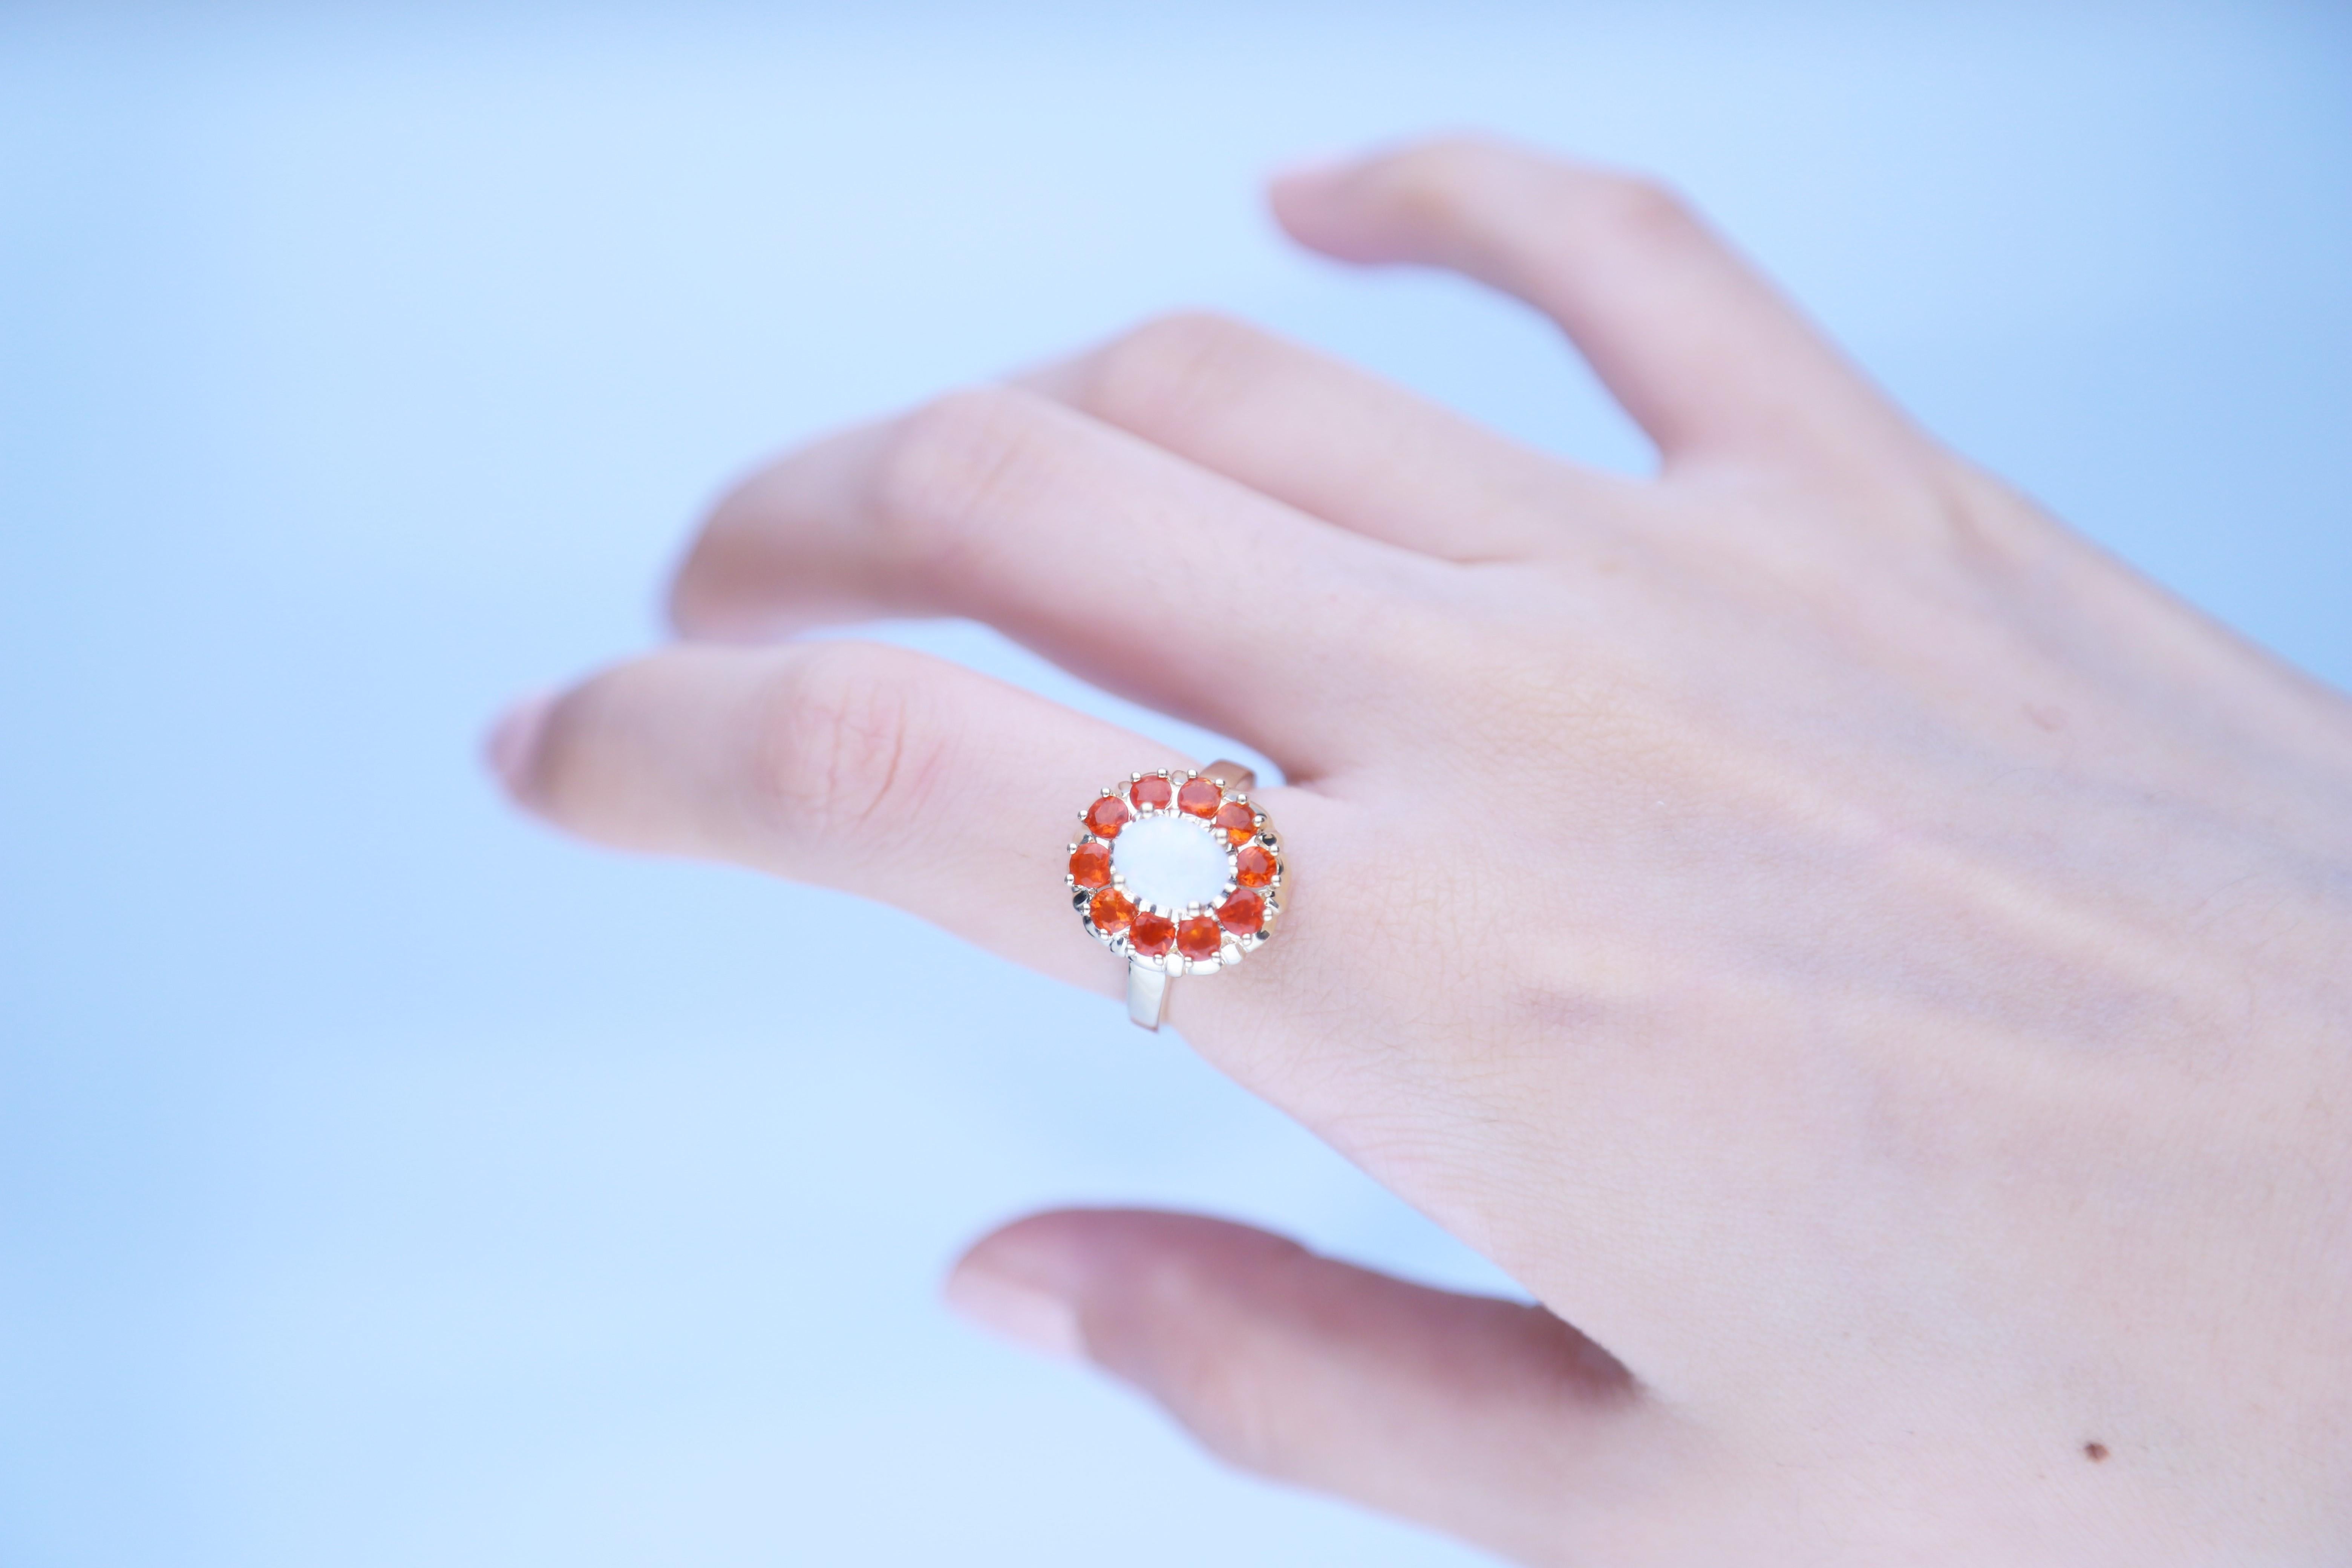 Stunning, timeless and classy eternity Unique Ring. Decorate yourself in luxury with this Gin & Grace Ring. The 14K Yellow Gold jewelry boasts with Oval-Cab Australian Opal 1 pcs 0.77 carat, Fire Opal (10 Pcs) 0.78 Carat accent stones for a lovely